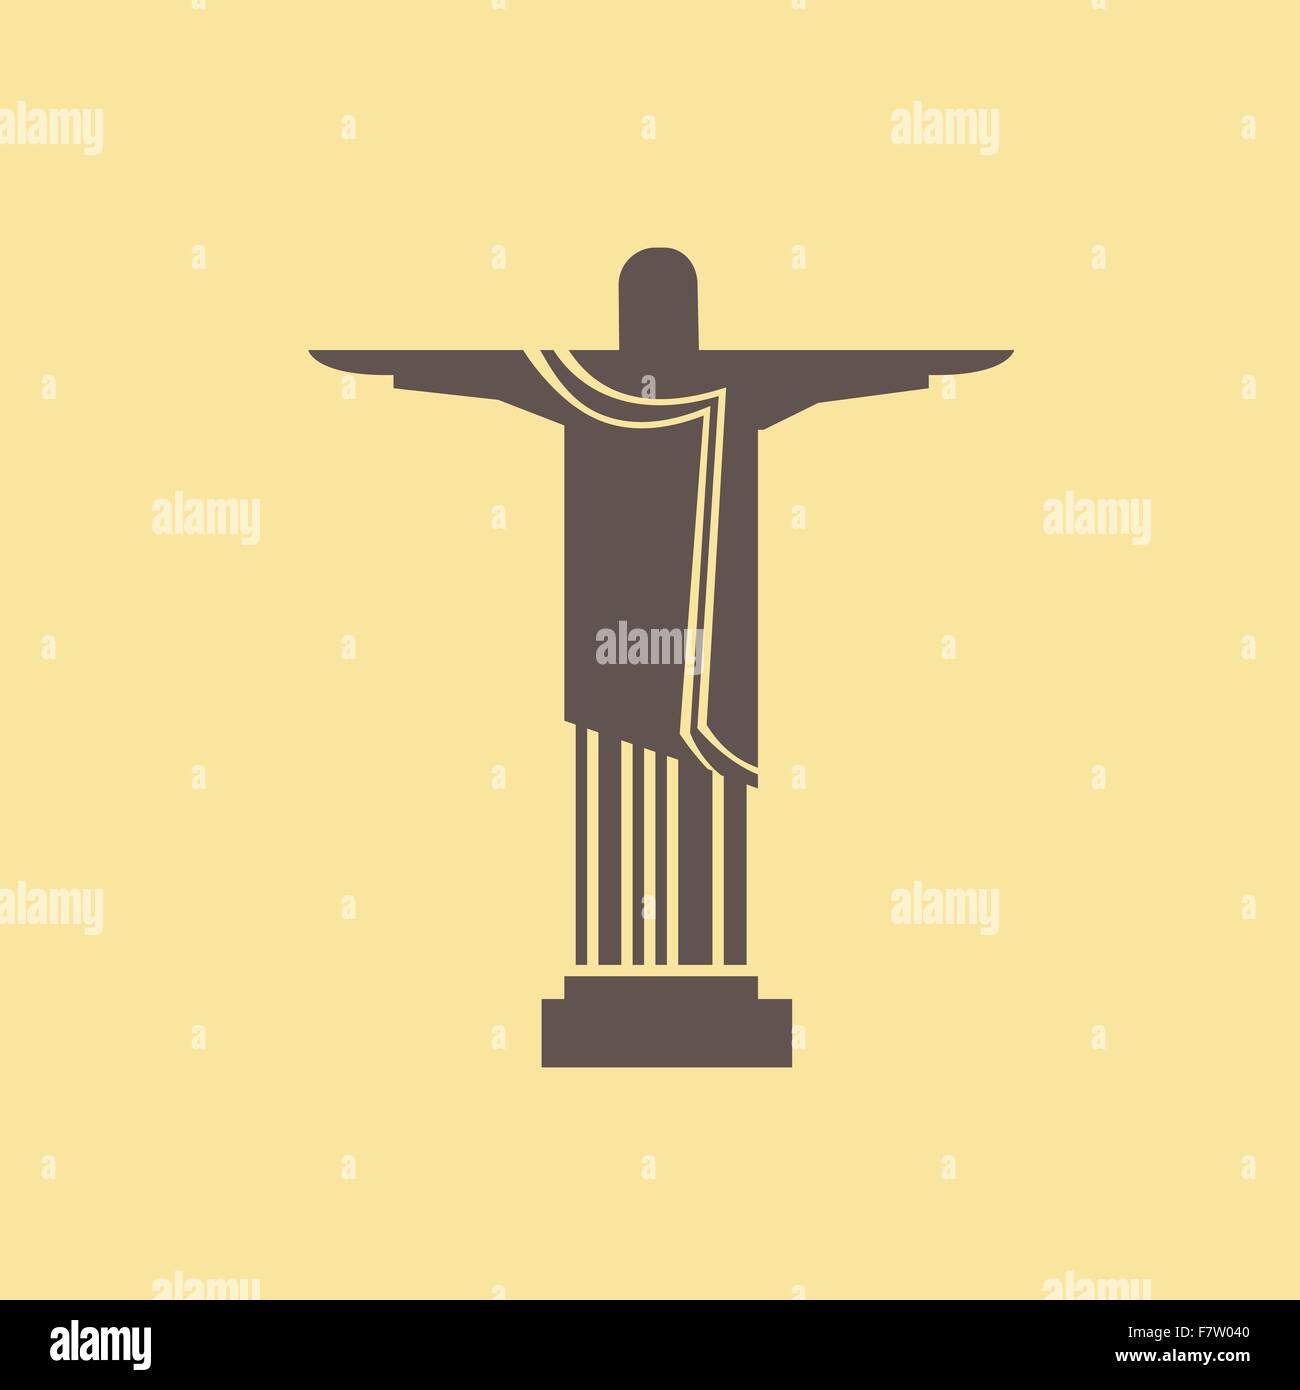 Brazil Sculpture of Christ the Redeemer Icon. Trendy Modern Flat Editorial  Stock Image - Illustration of icon, brasil: 130942684